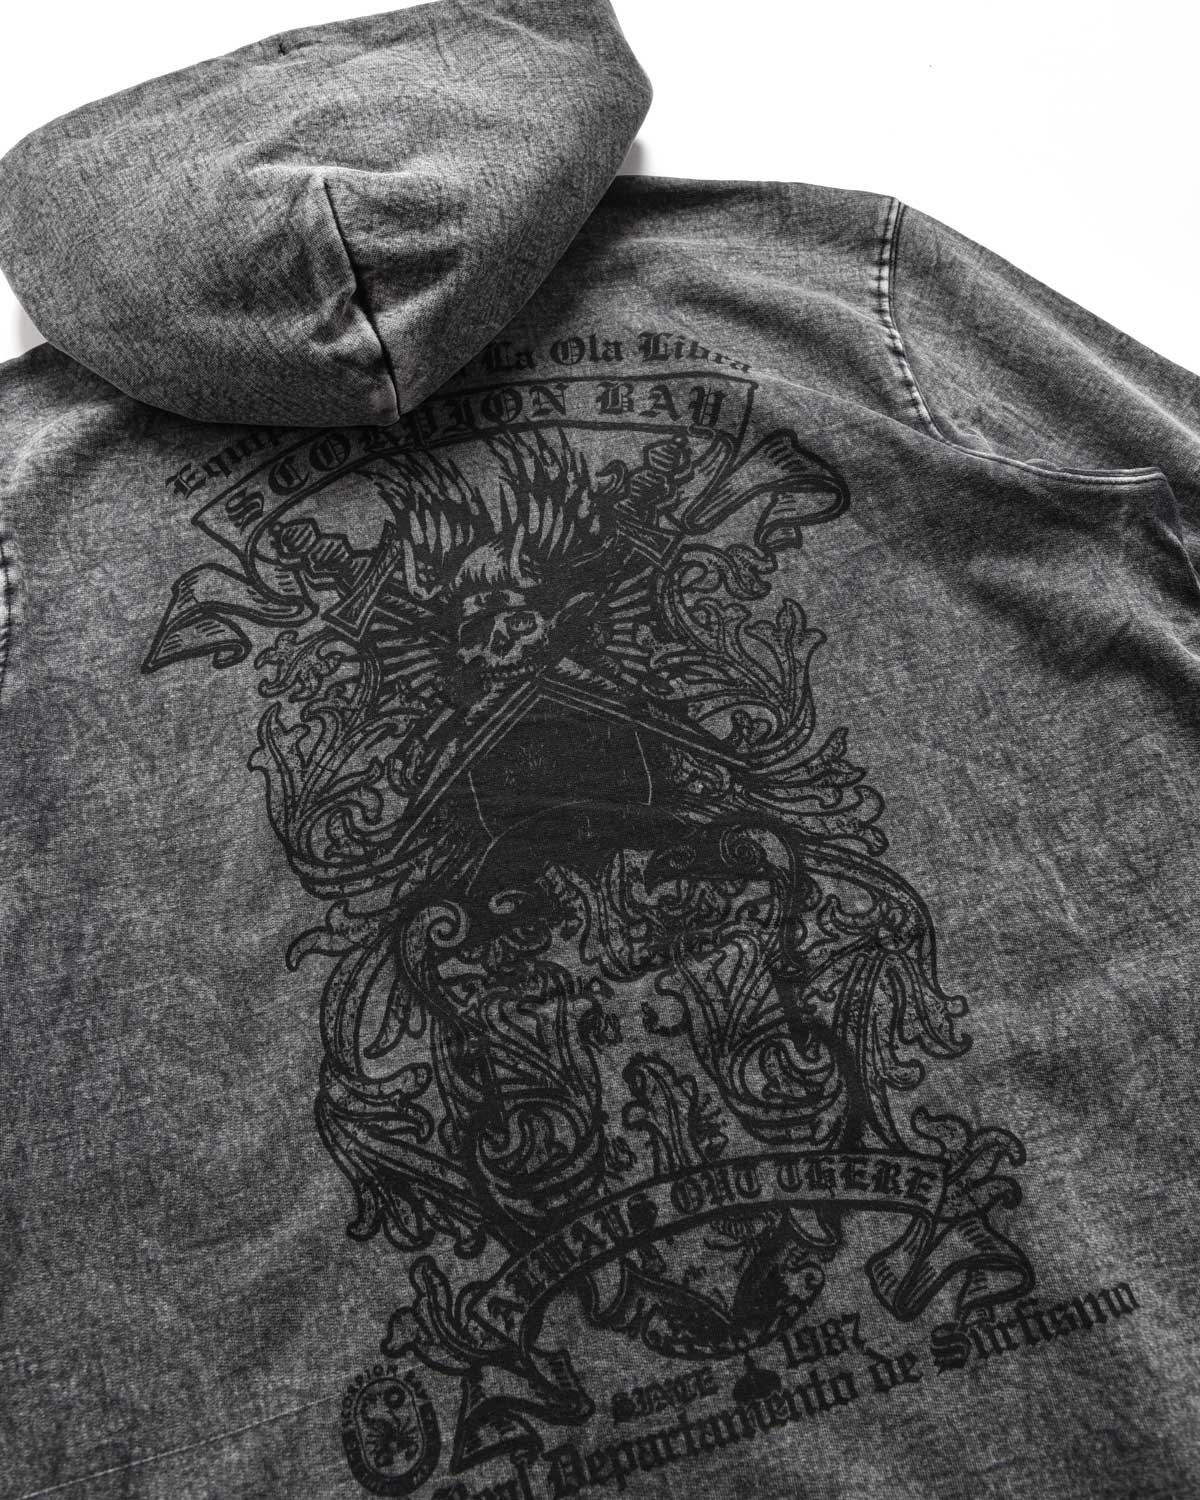 Man | Stonewashed Anthracite Sweatshirt With Hood And “Dept De Surfismo” Print